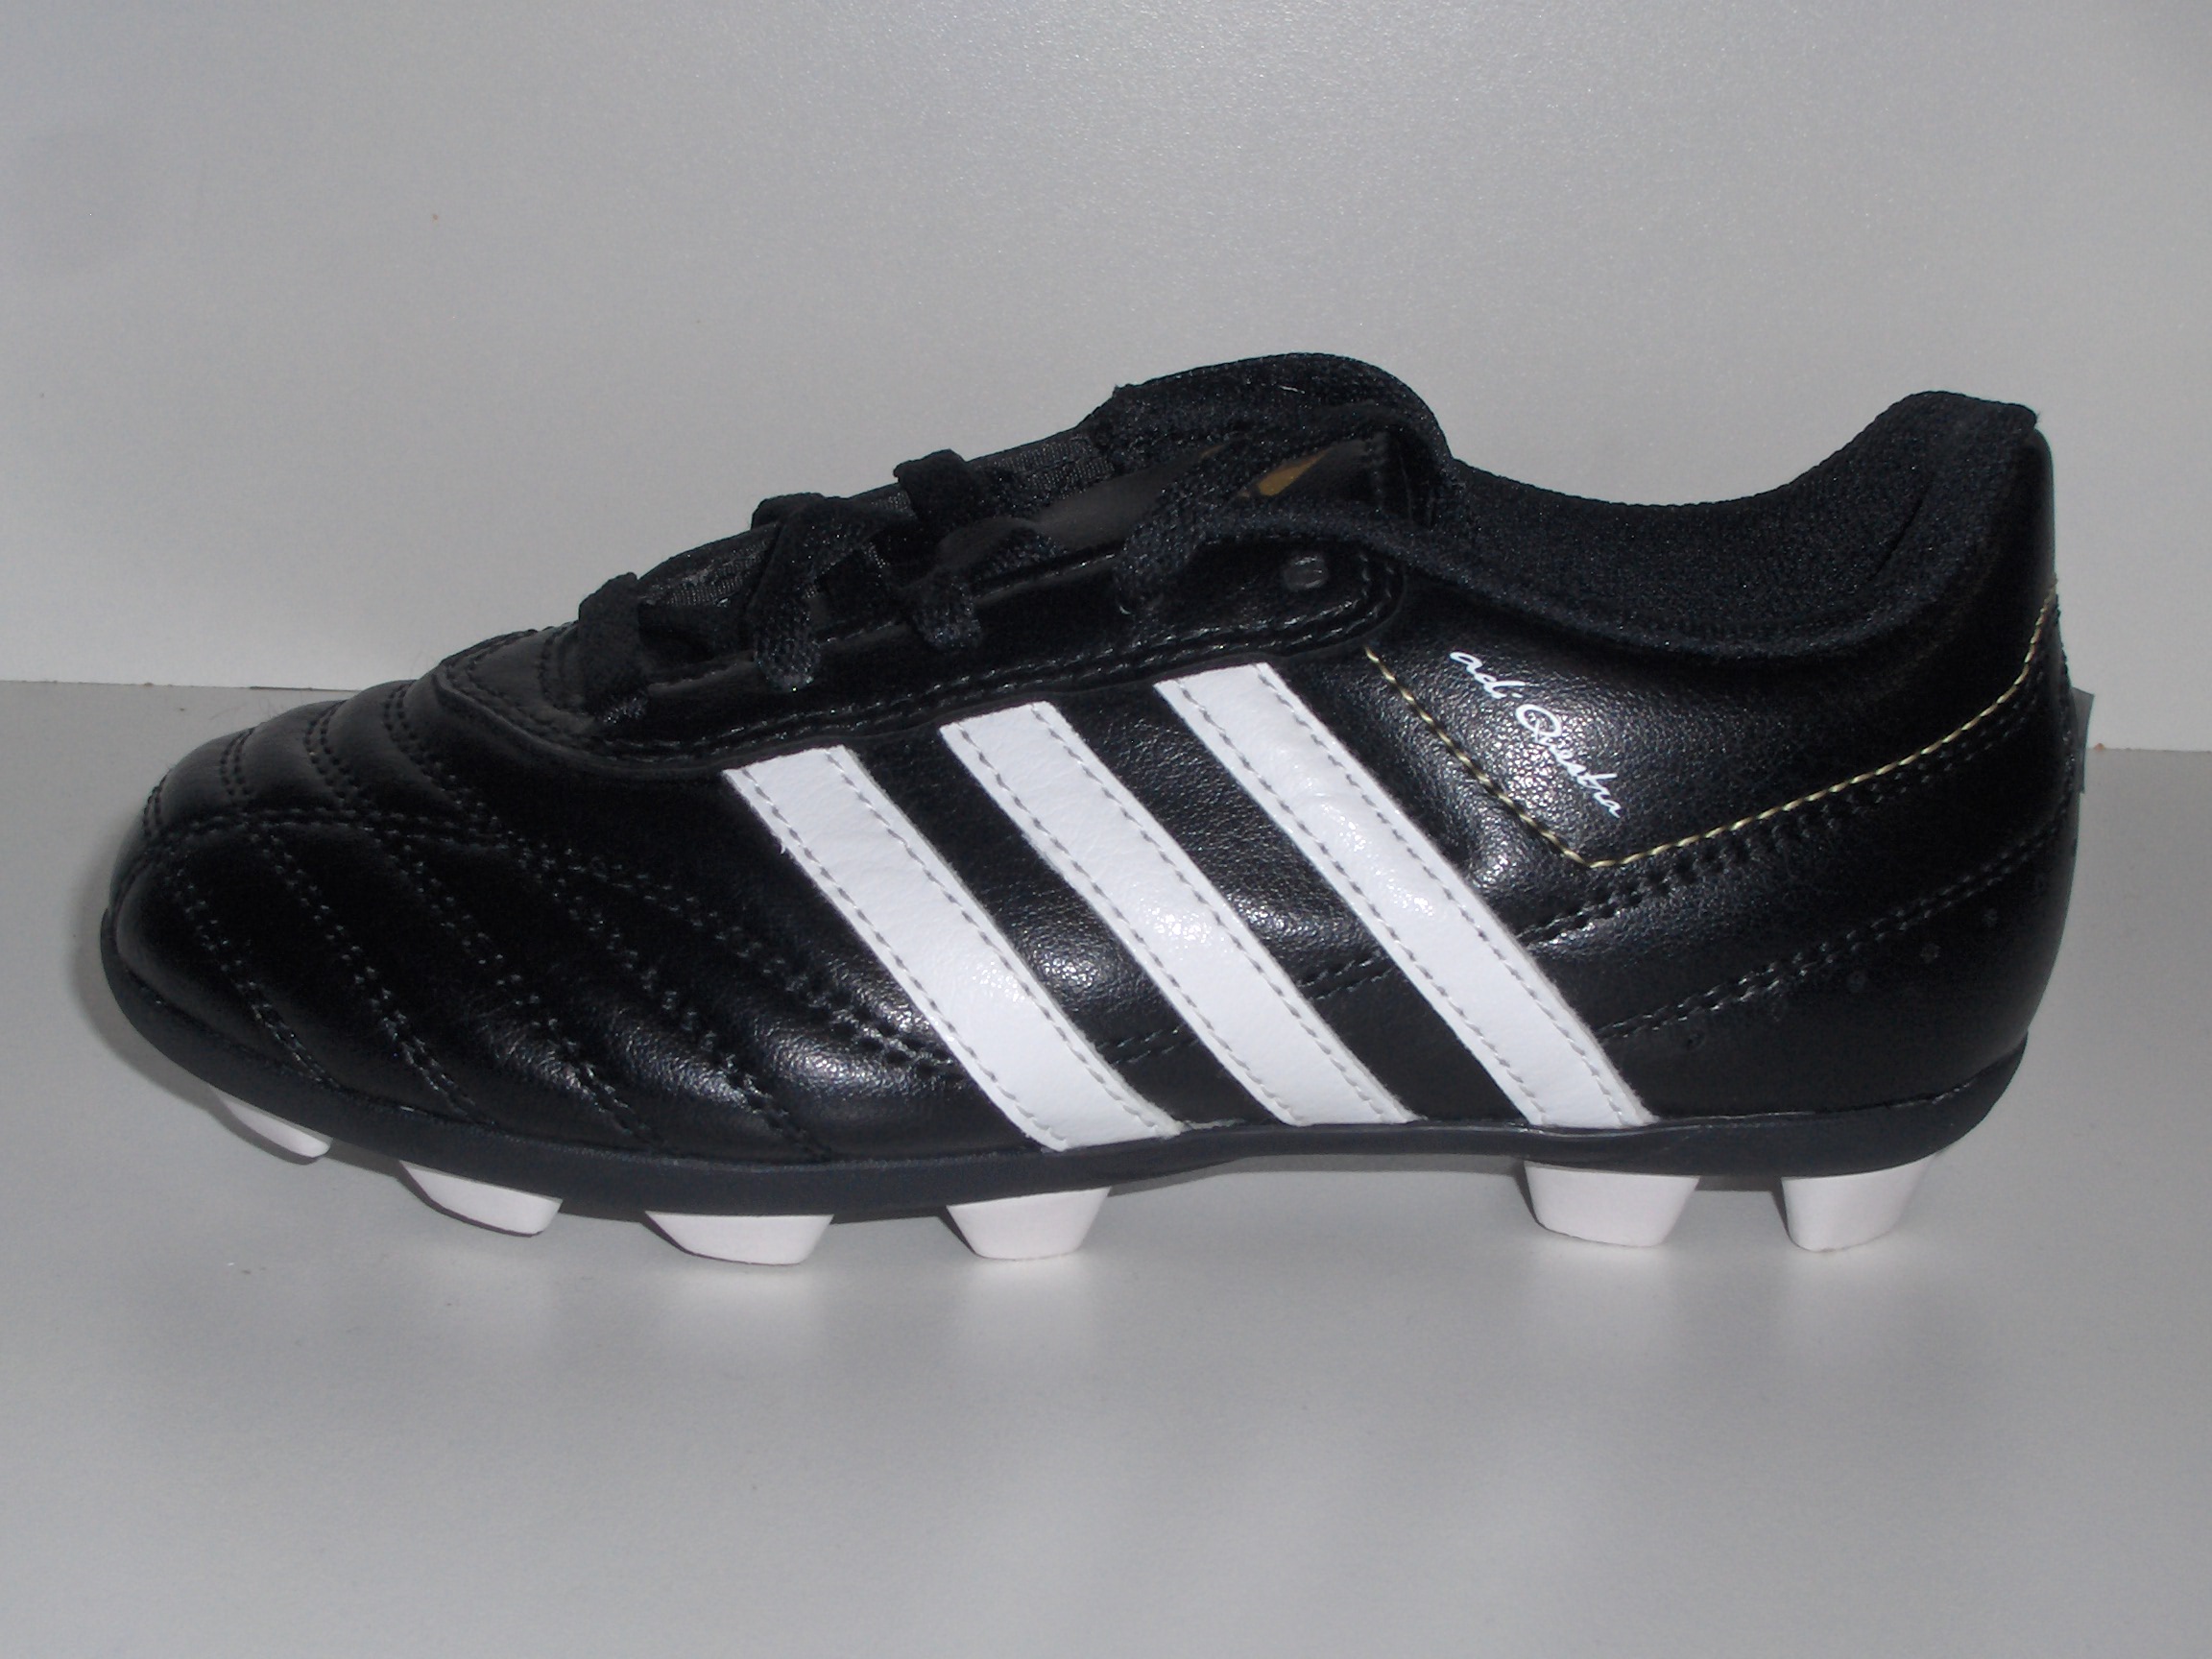 adidas childrens soccer cleats